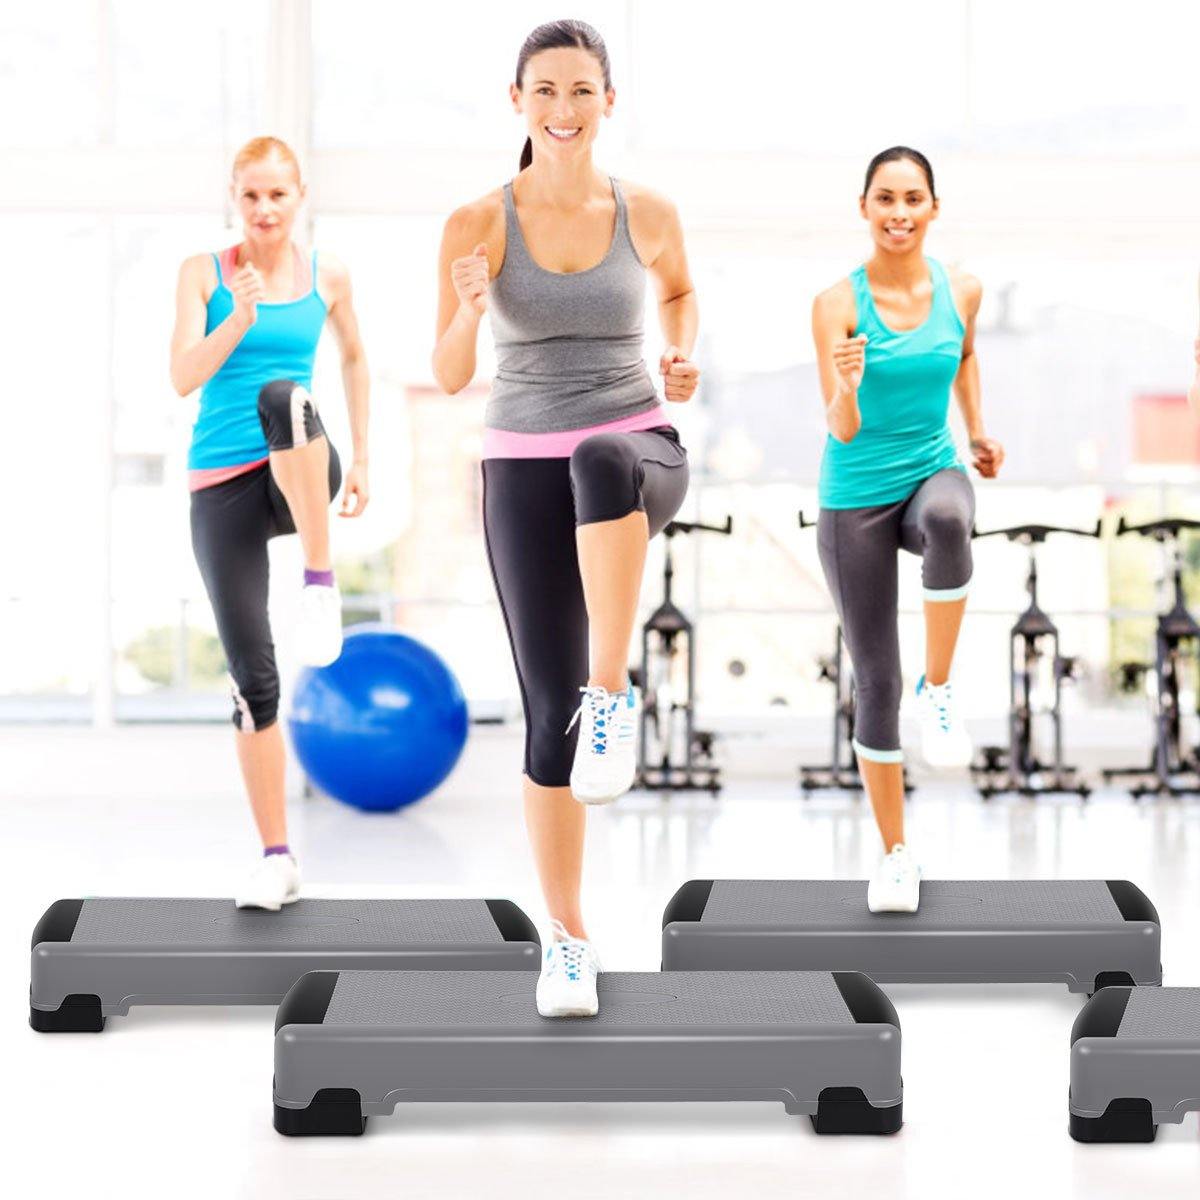 A good choice of 3 types of gym equipment for exercising